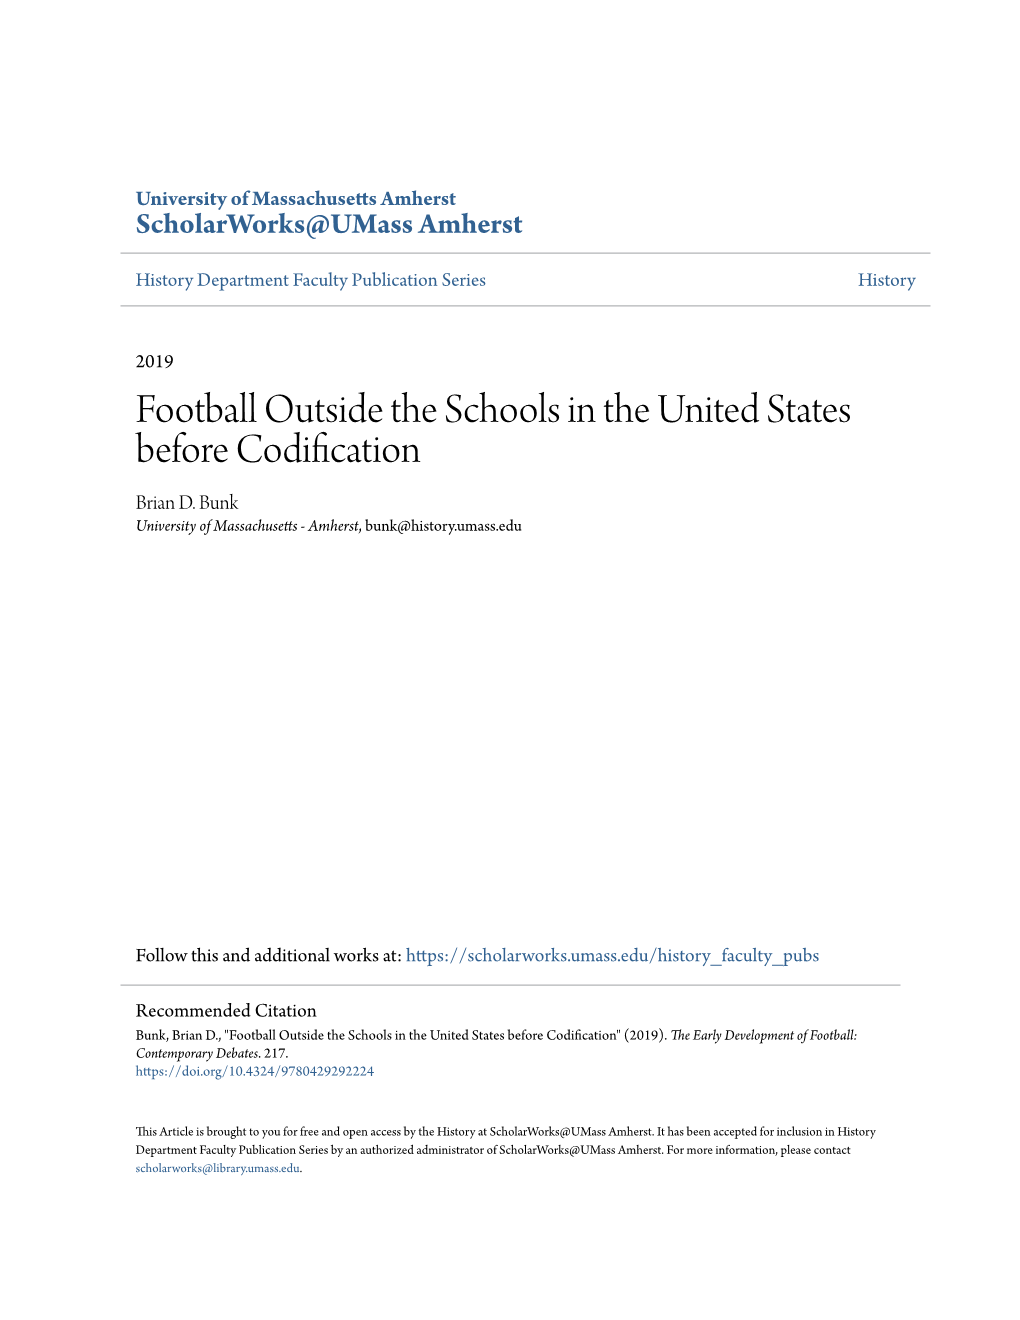 Football Outside the Schools in the United States Before Codification Brian D